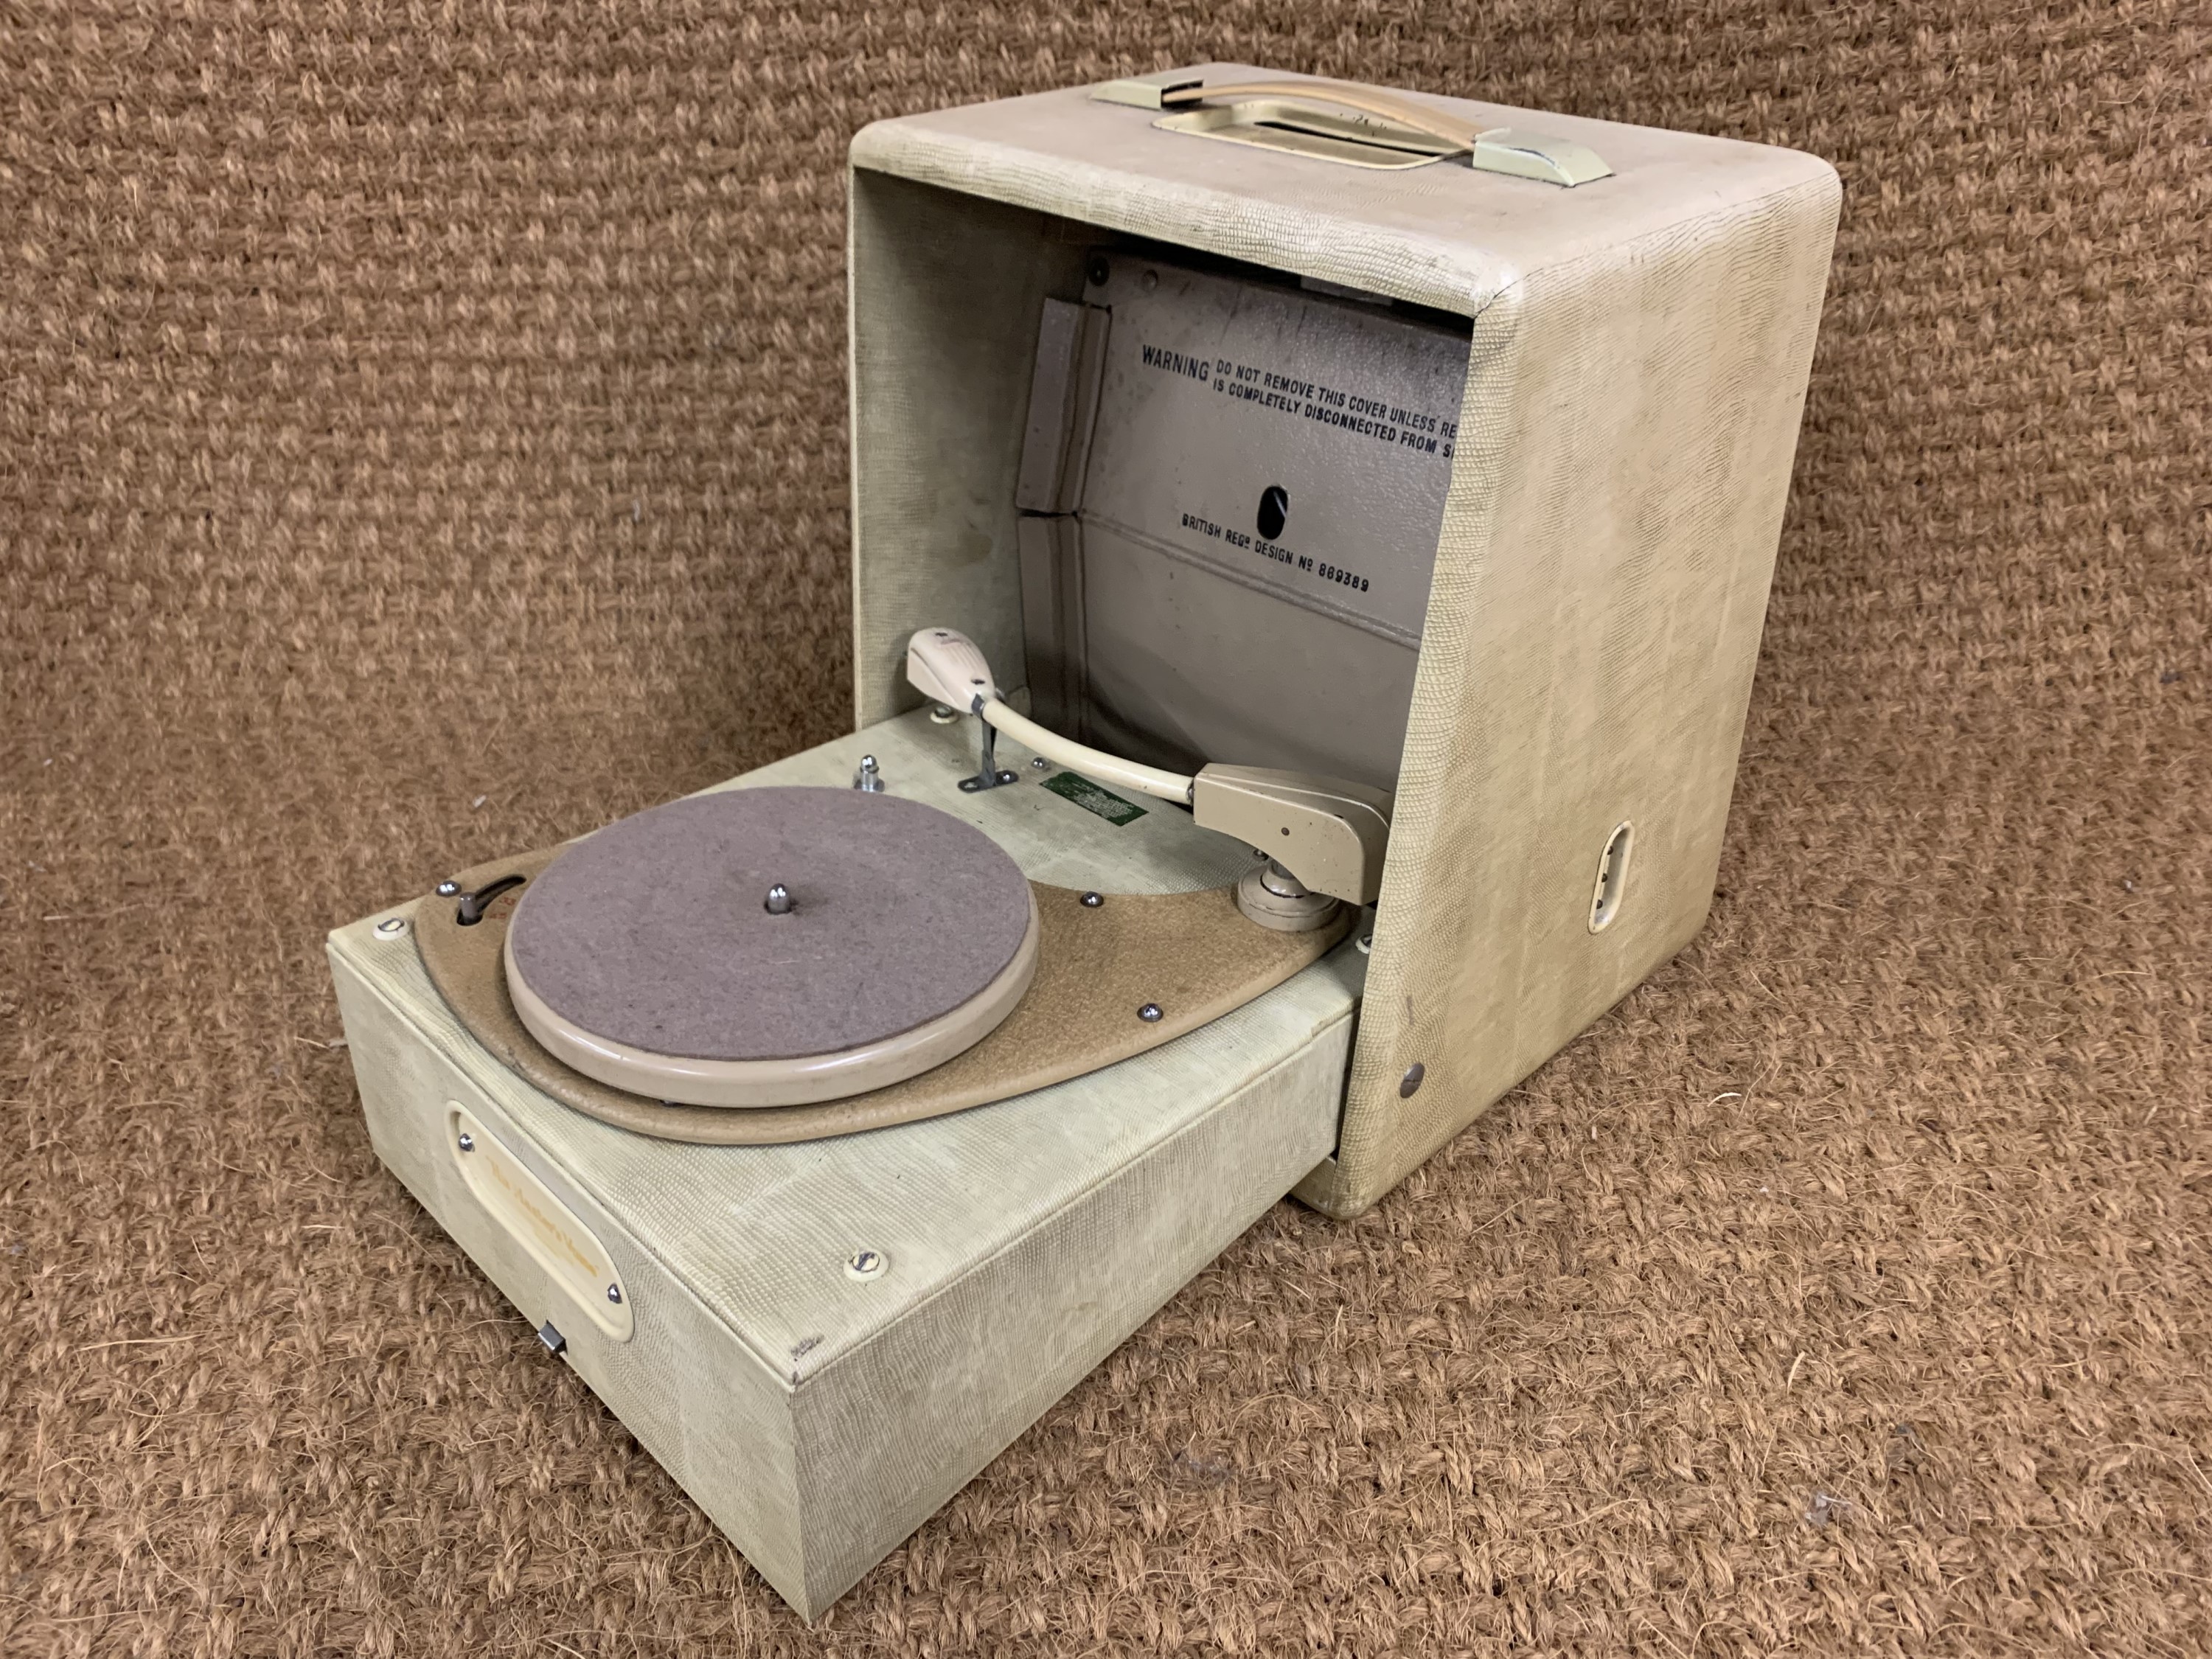 An HMV 1950s portable radio and turntable, model number 1507, AM radio with fold out turntable at - Image 2 of 2